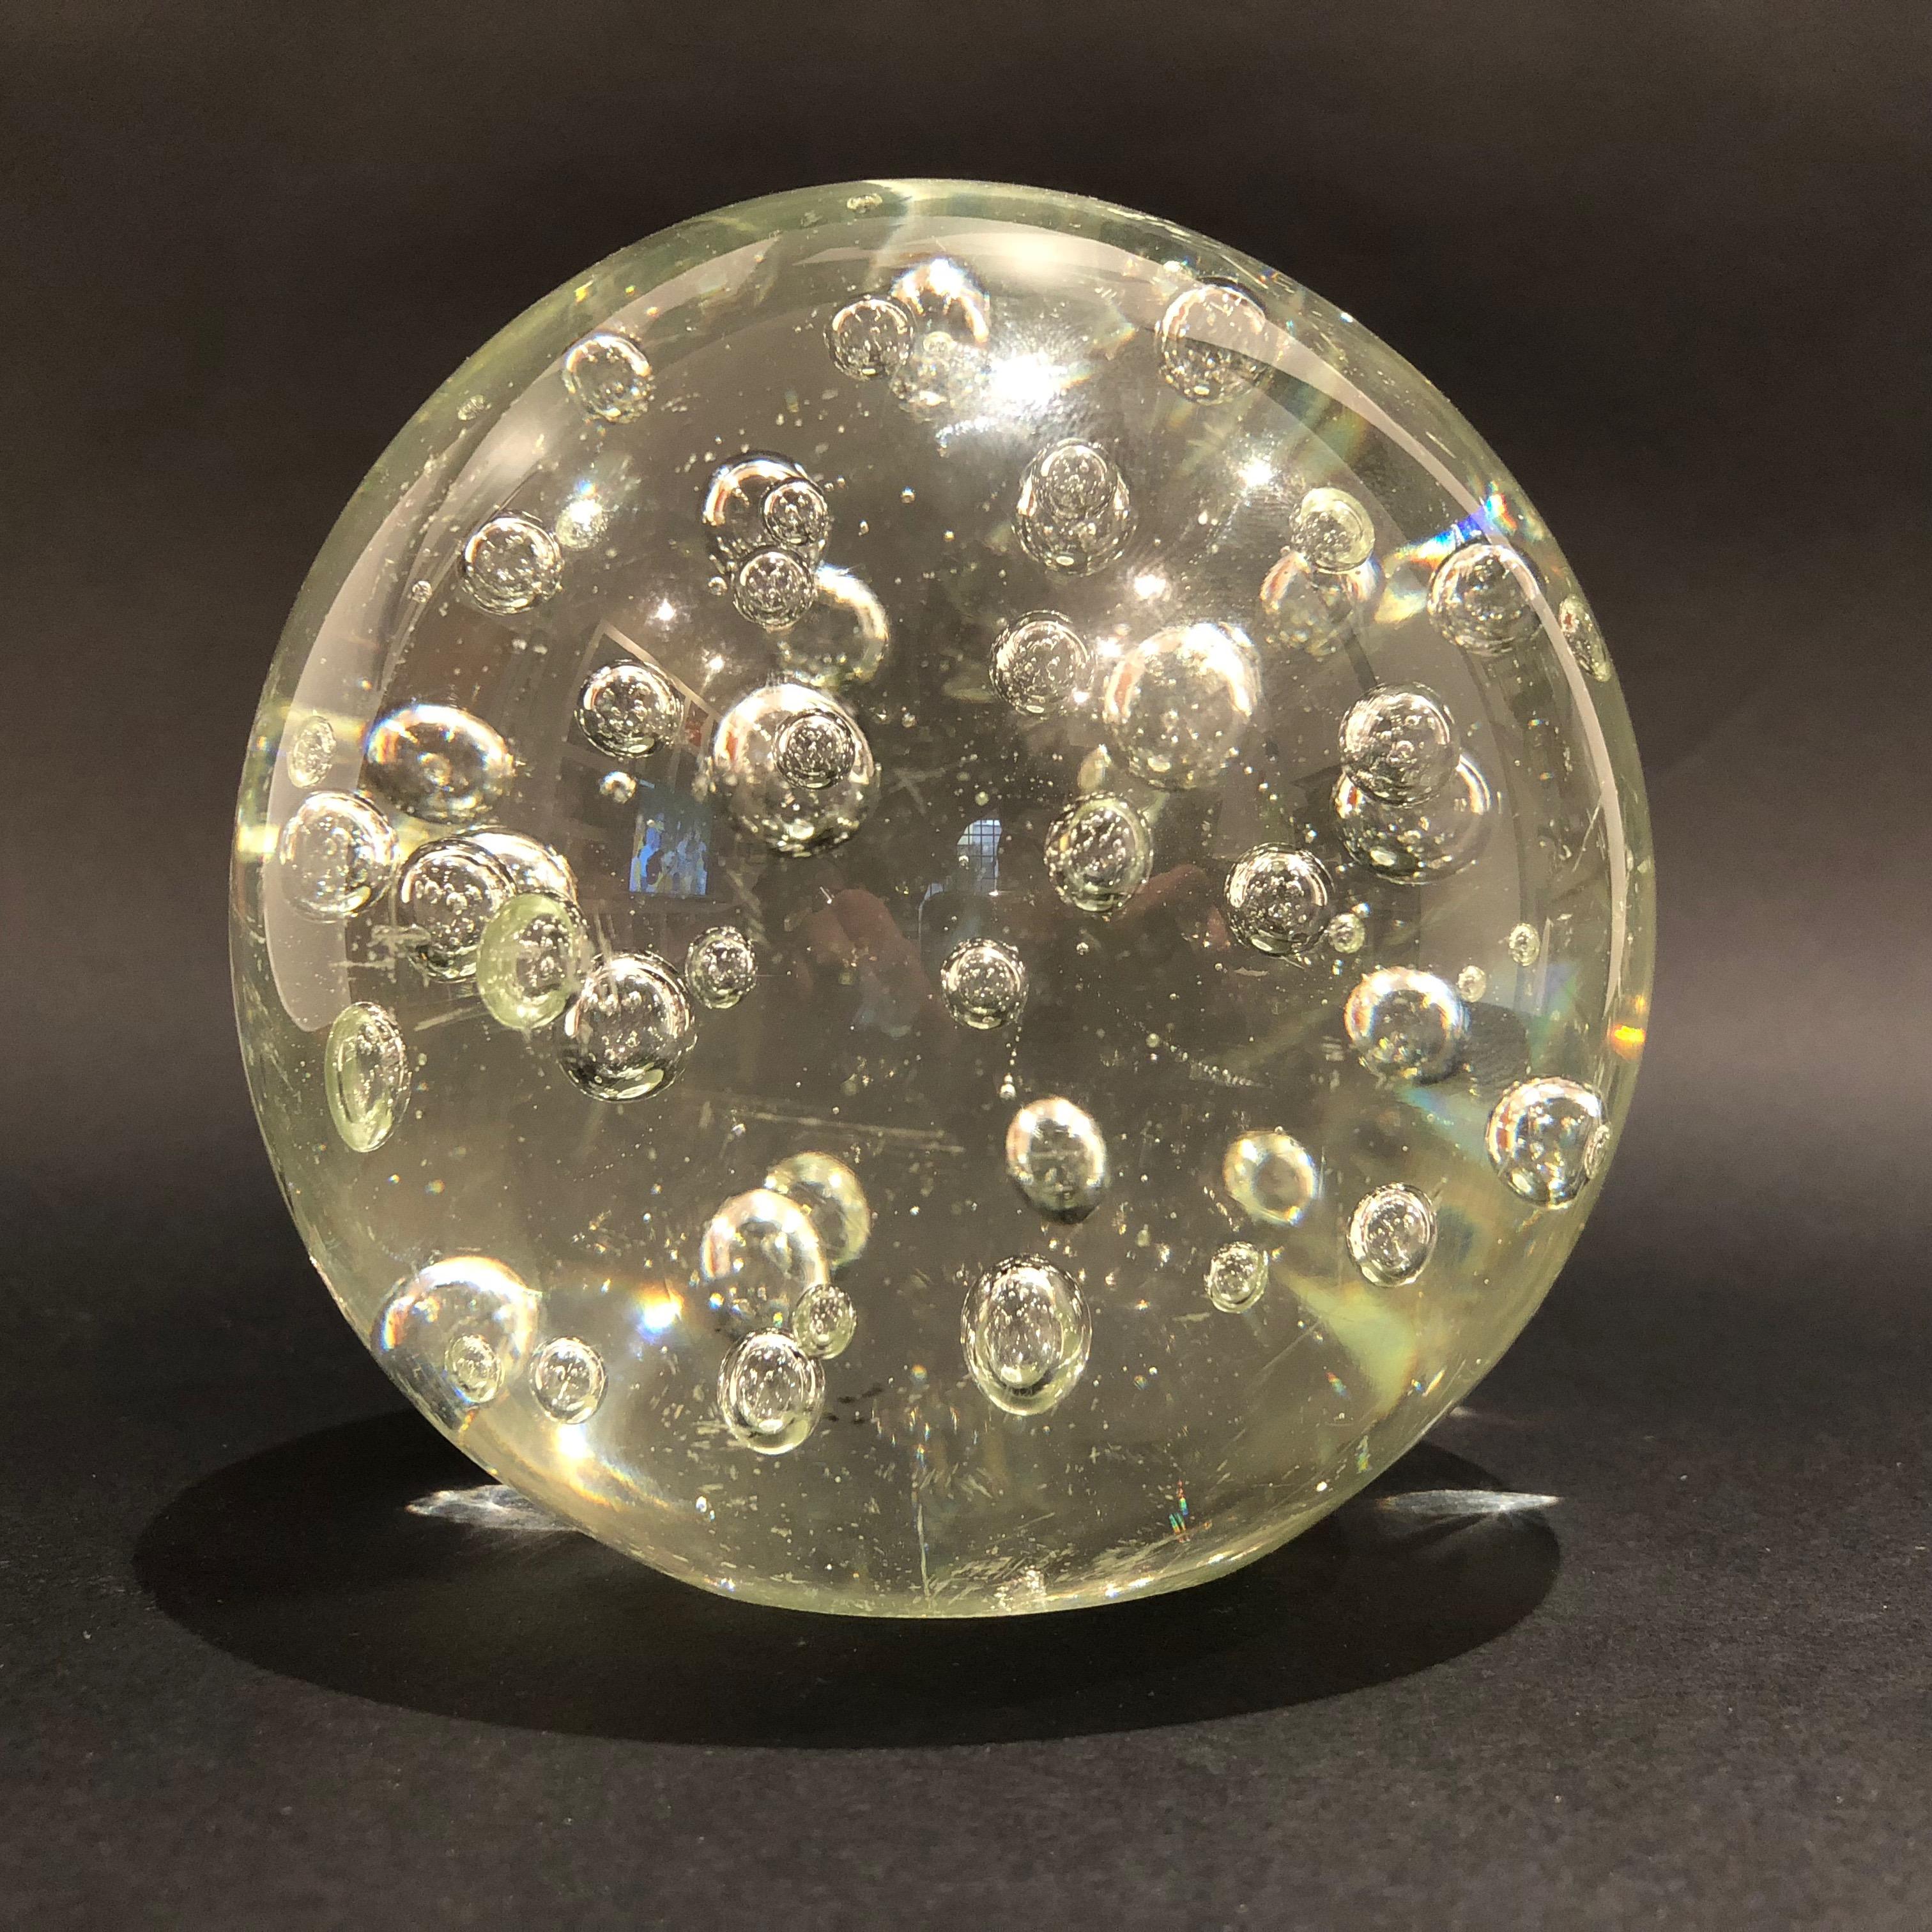 Mid-Century Modern Large Murano Glass Sphere Paperweight with Internal Bubbles, 1970s, Italy